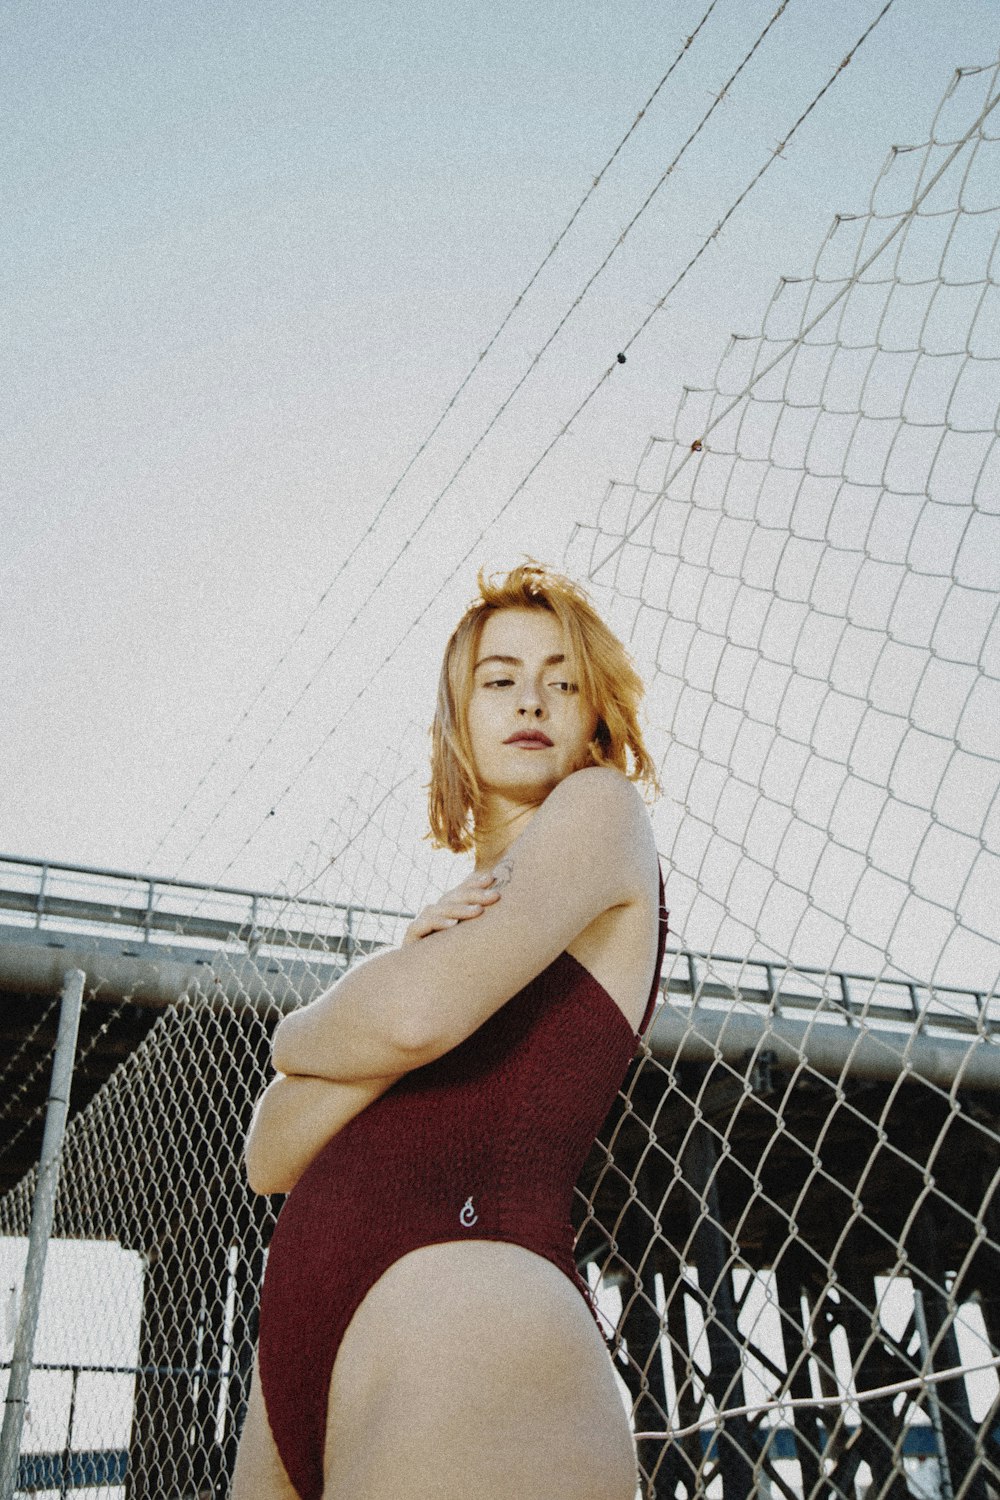 woman in red tank top leaning on chain link fence